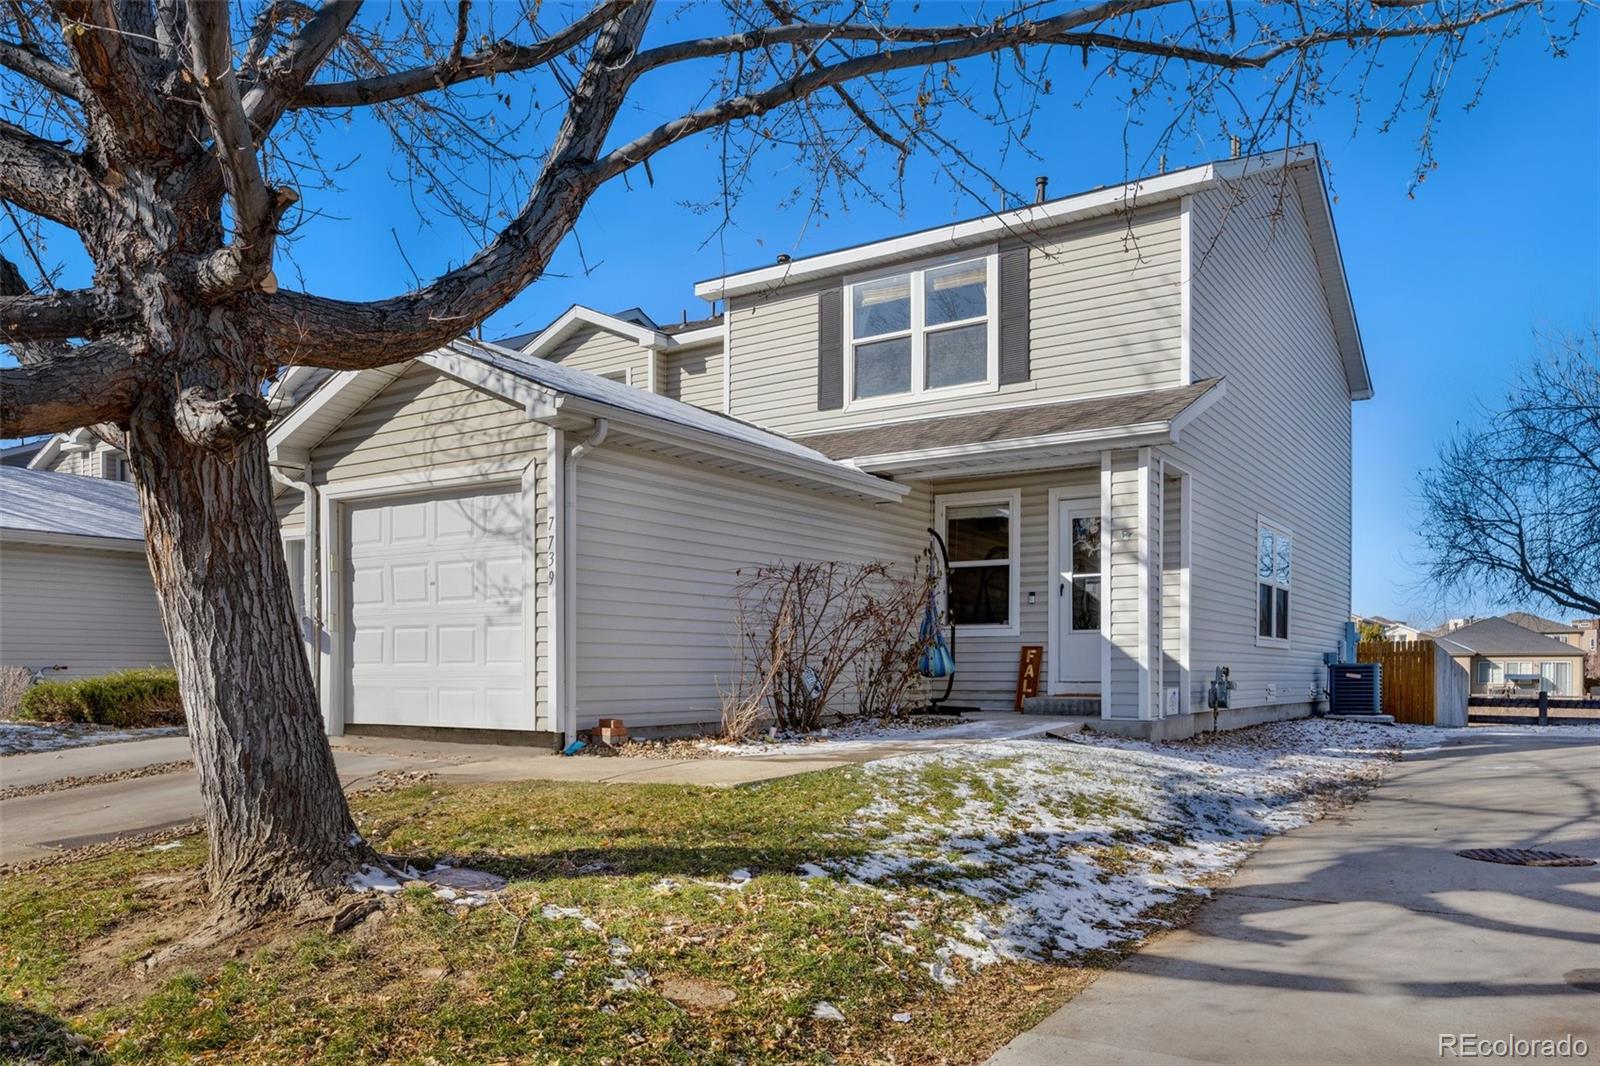 Report Image for 7739 S Kalispell Court,Englewood, Colorado